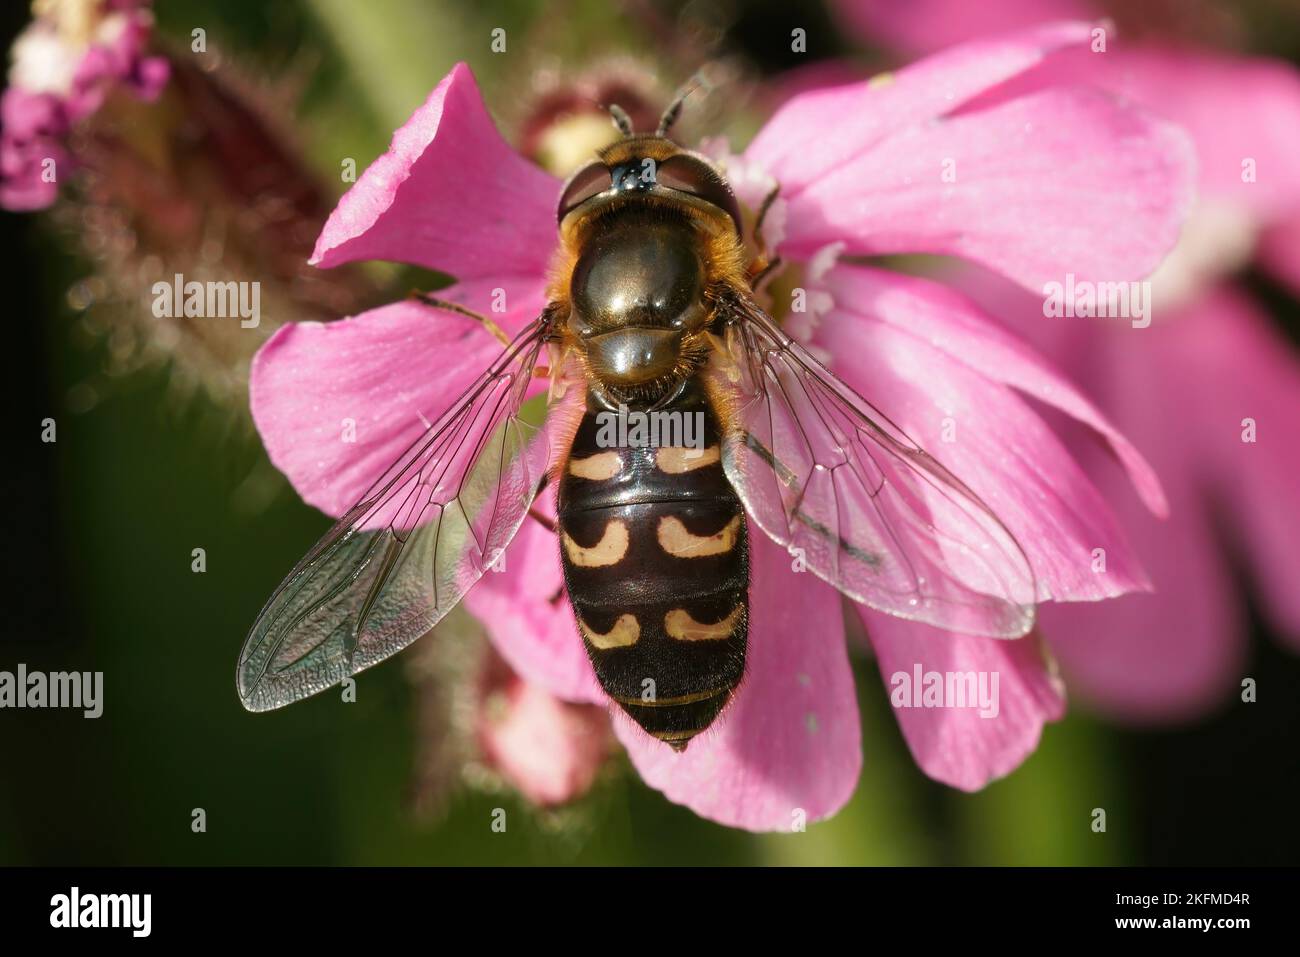 Natural dorsal closeup on a Yellow-clubbed , Scaeva selenitica sitting on a pink flower Stock Photo